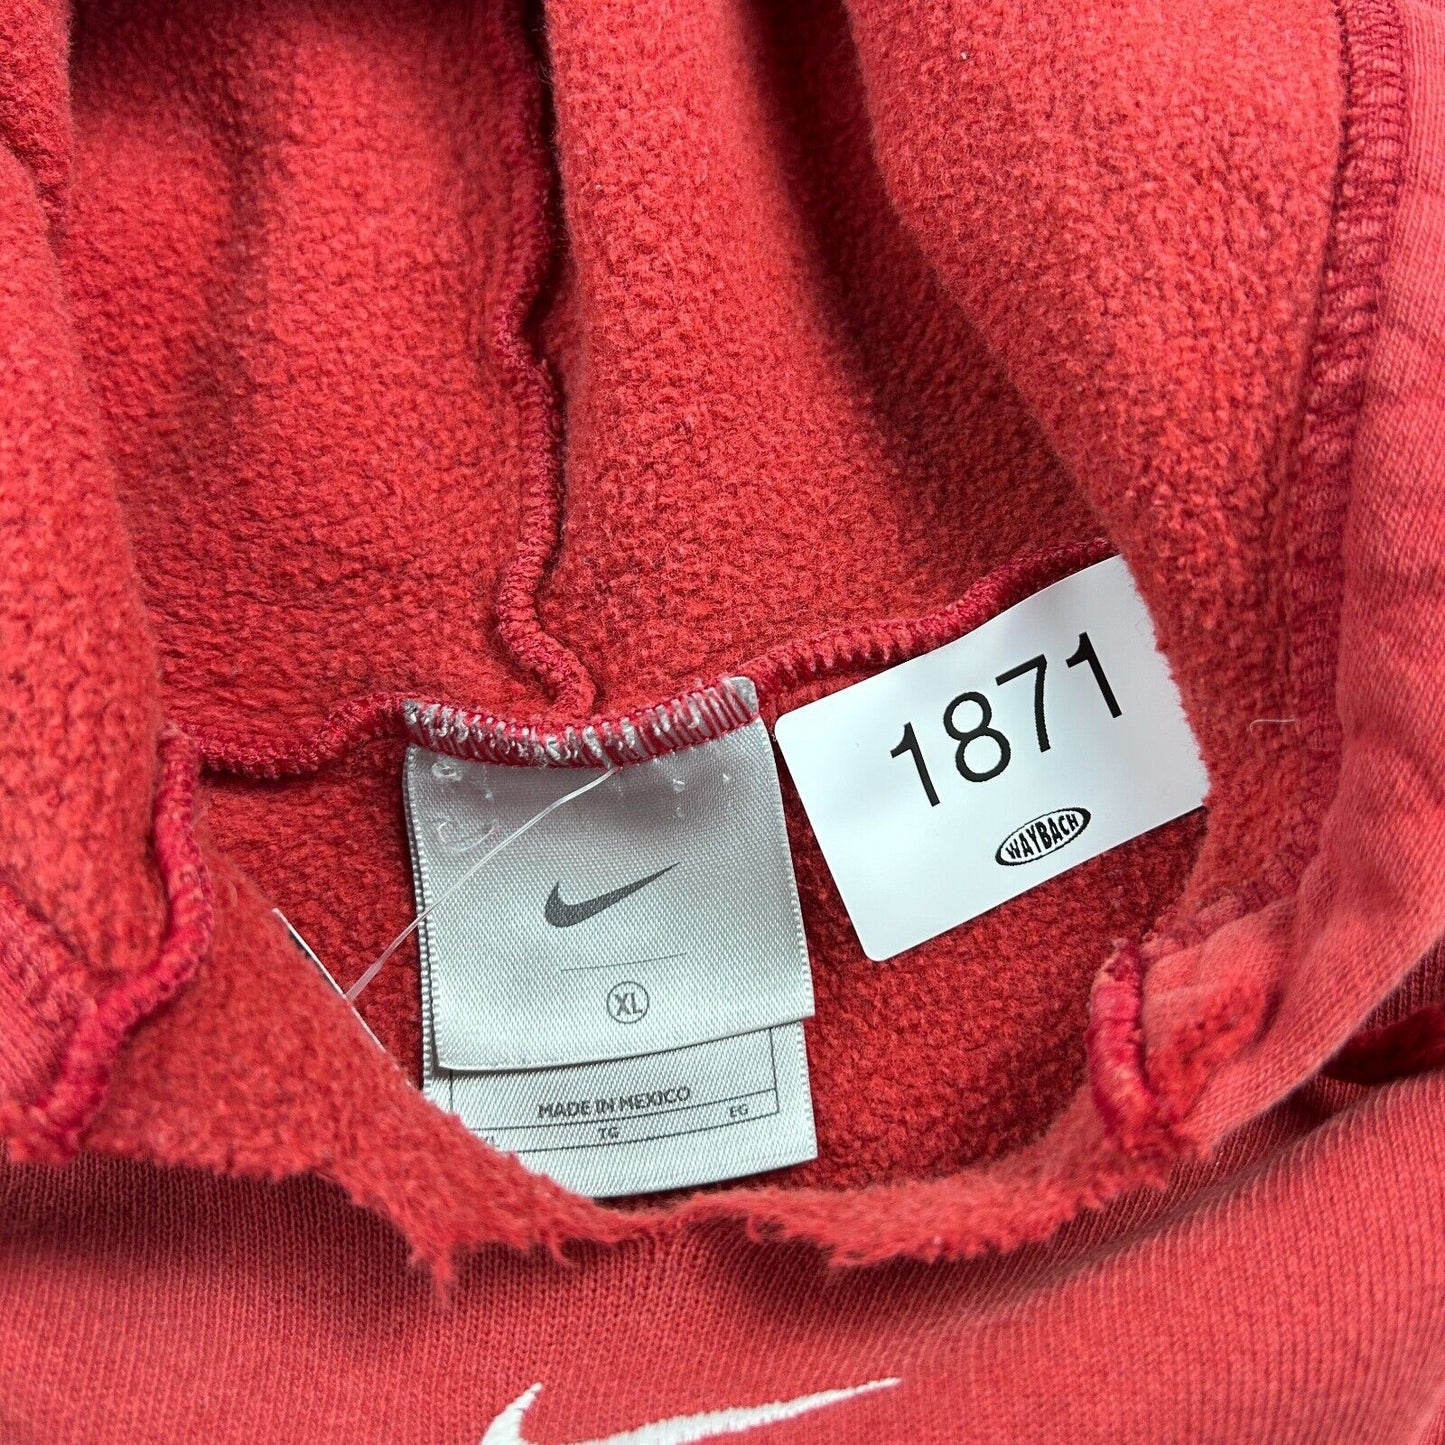 VINTAGE 90s | NIKE Mid Swoosh Faded Red Hoodie Sweater sz XL Adult